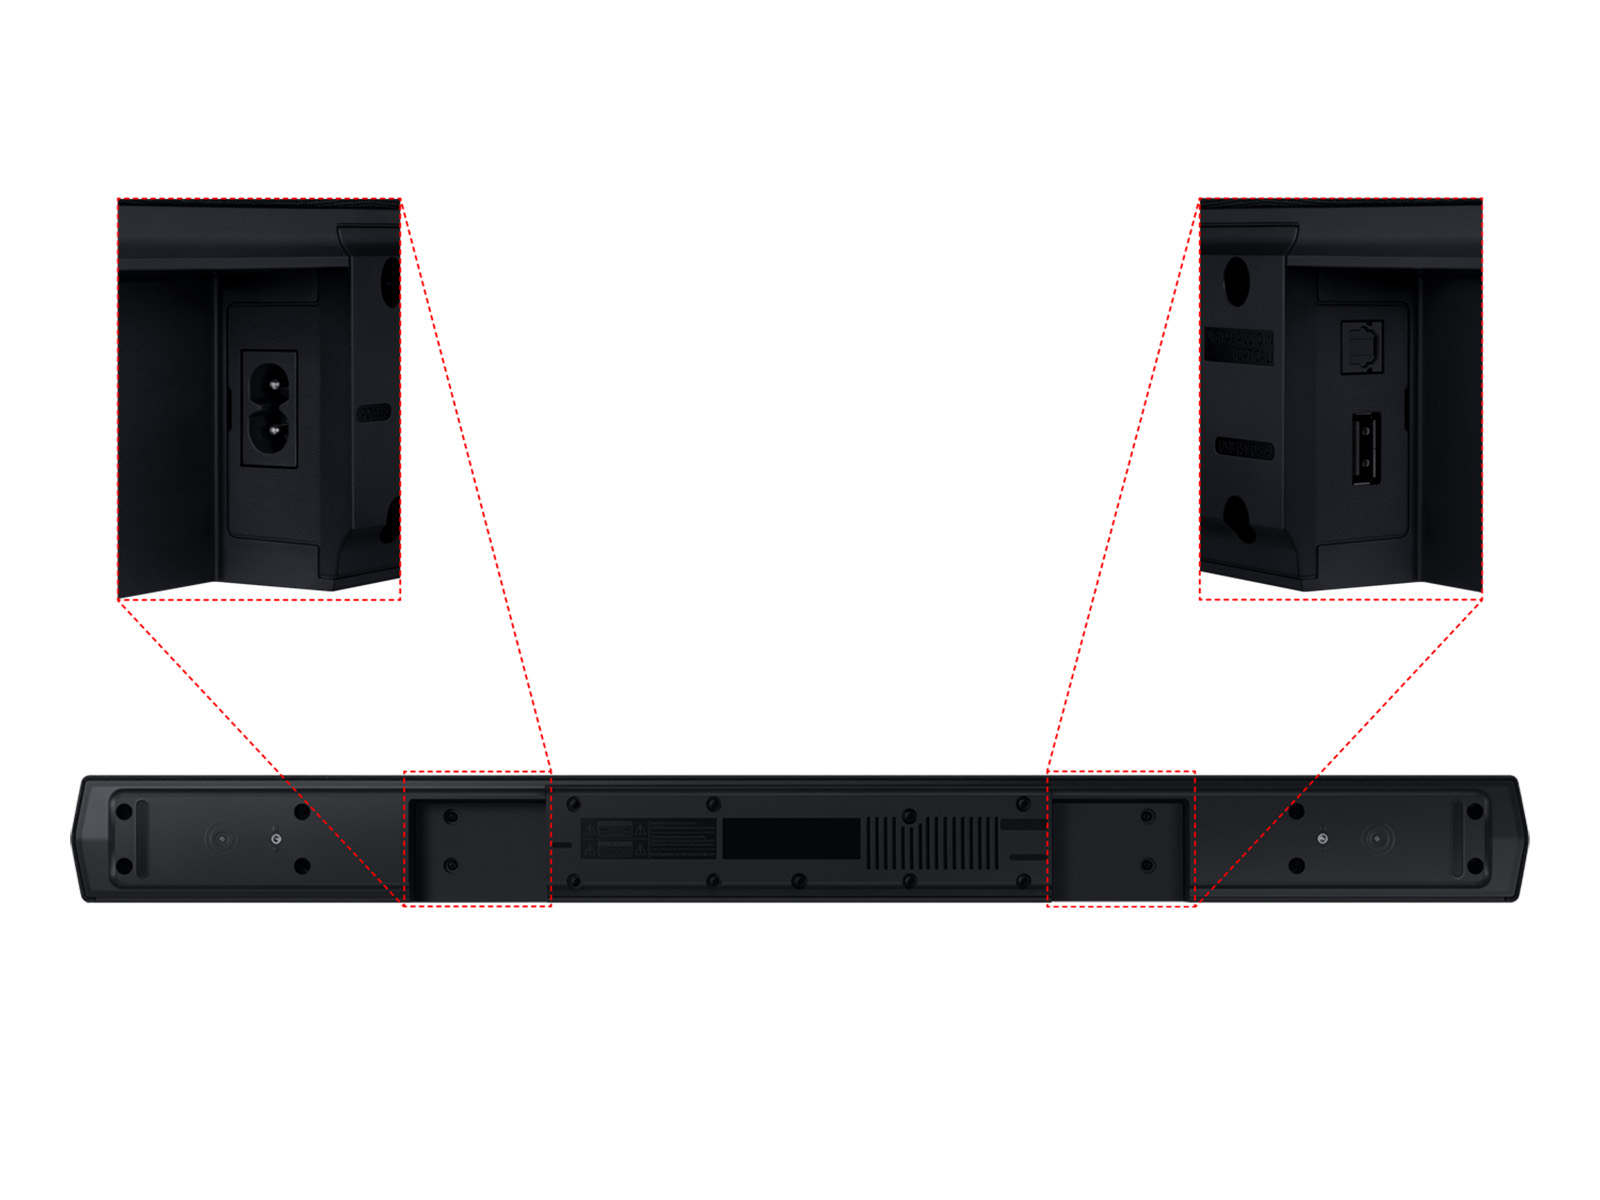 MCS-434, Home Theater / Speaker Bar, Products